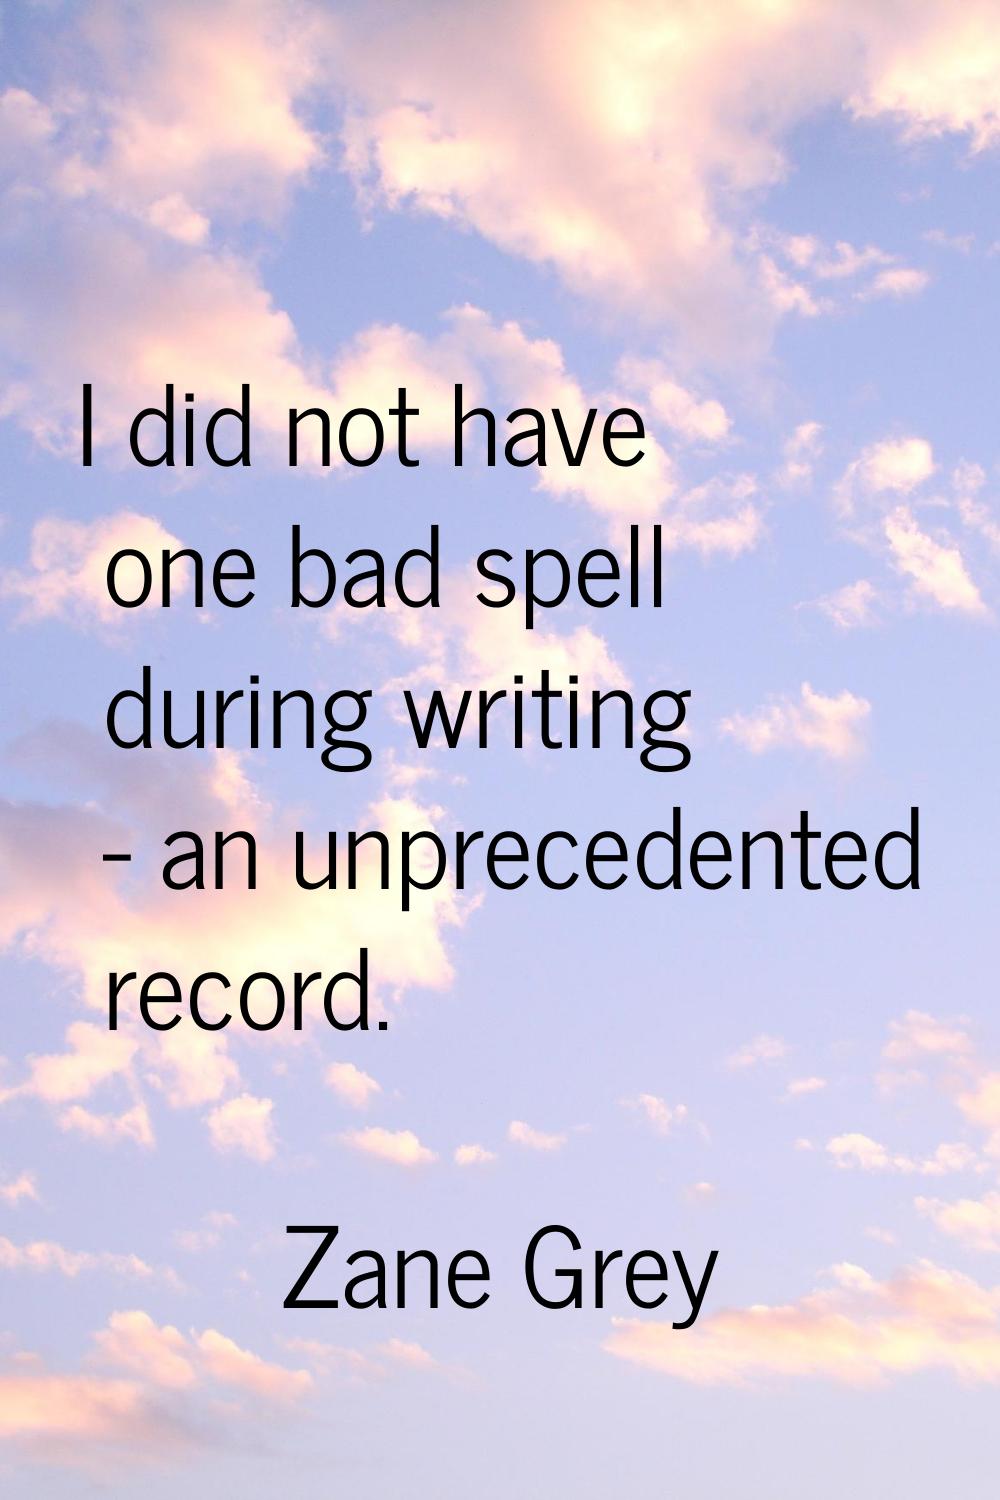 I did not have one bad spell during writing - an unprecedented record.